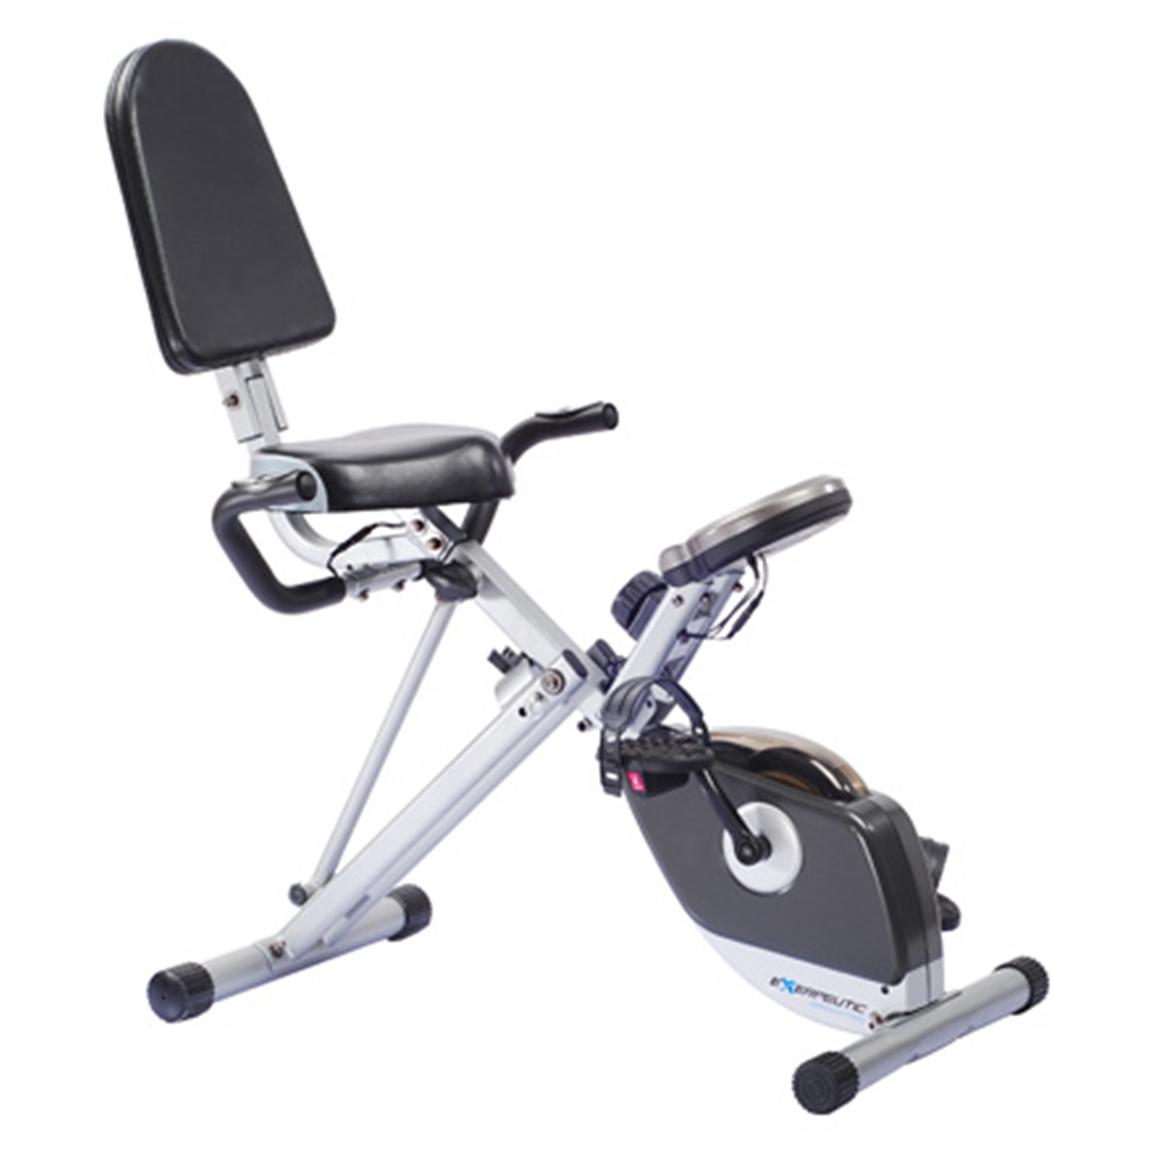 Exerpeutic 400xl Folding Recumbent Bike 579490 At Sportsmans Guide